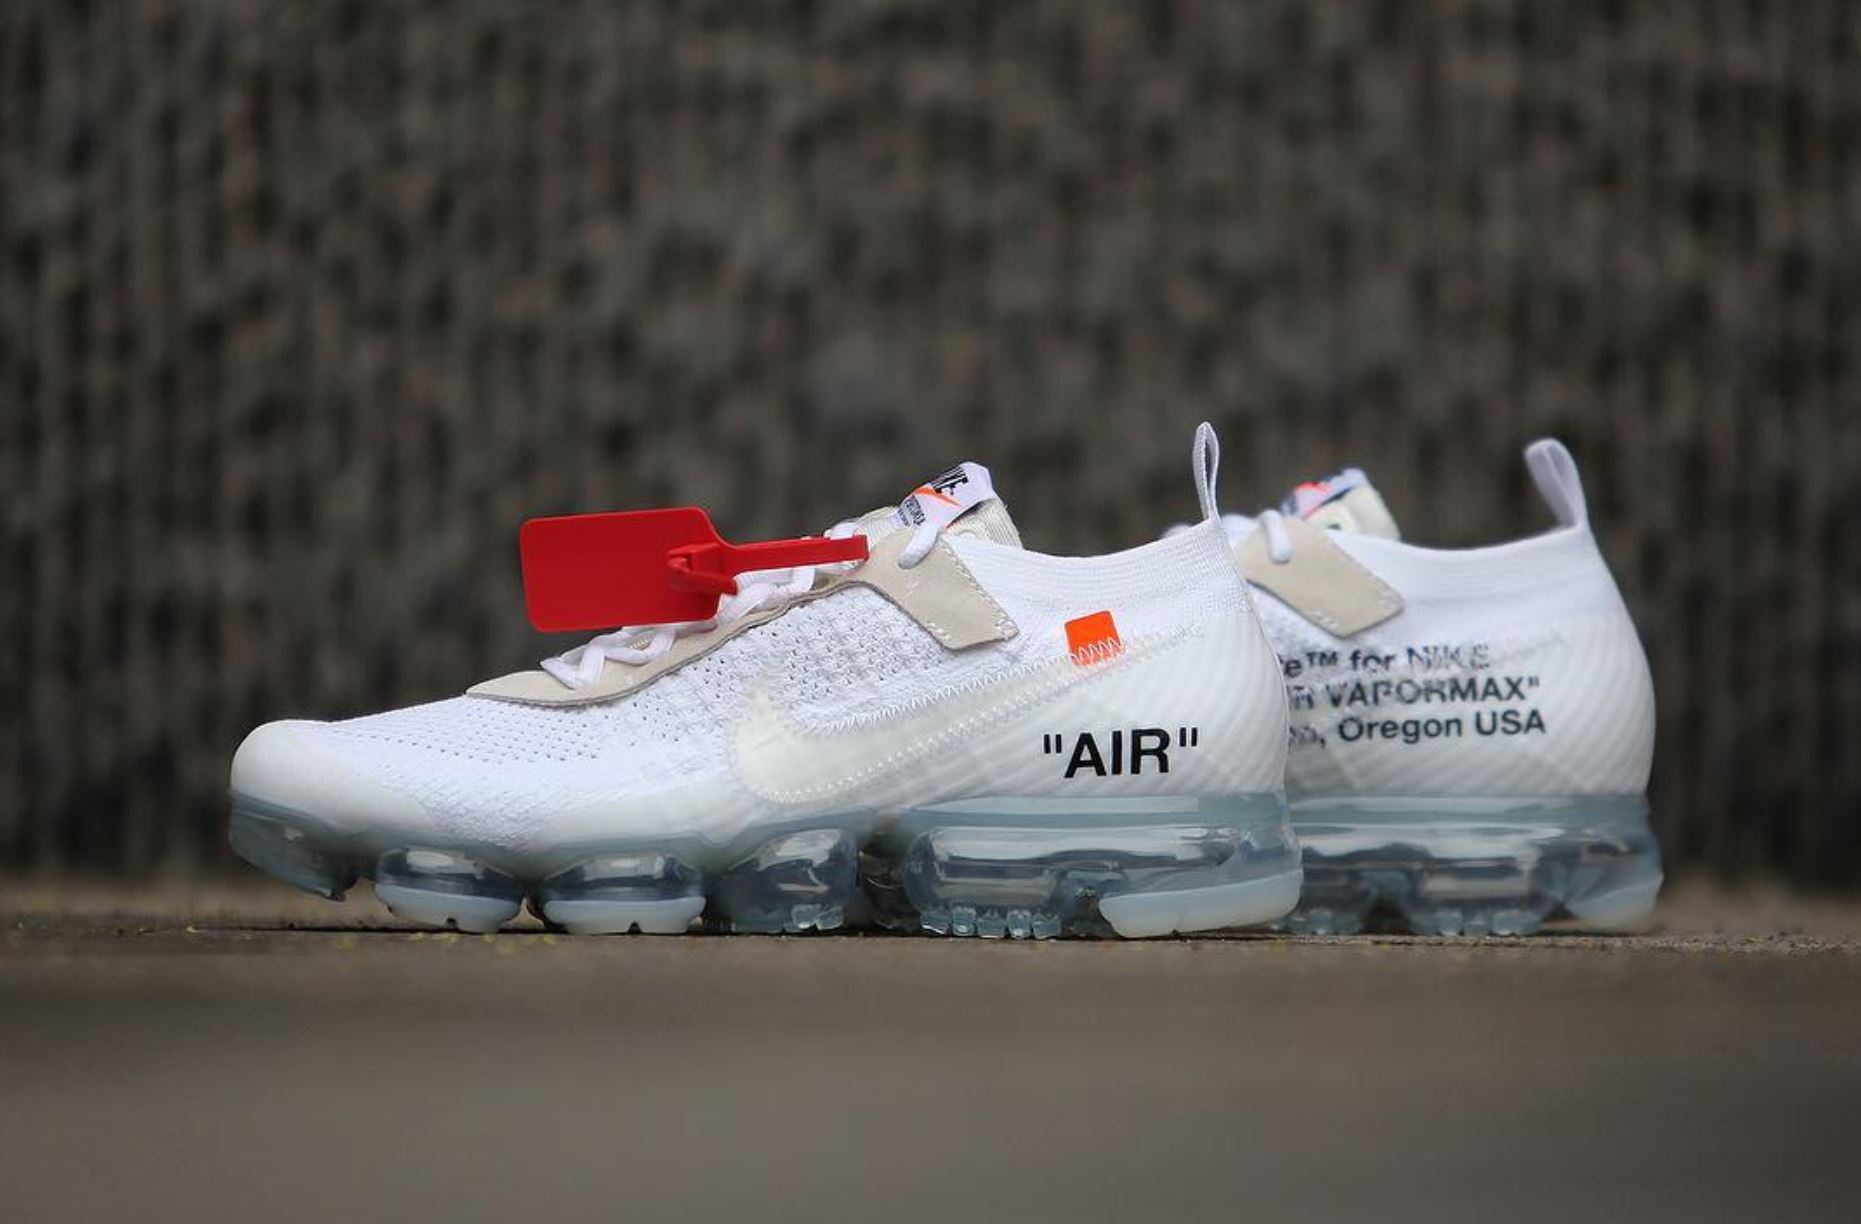 Nike Off White X Vapormax Flash Sales, 55% OFF | www 